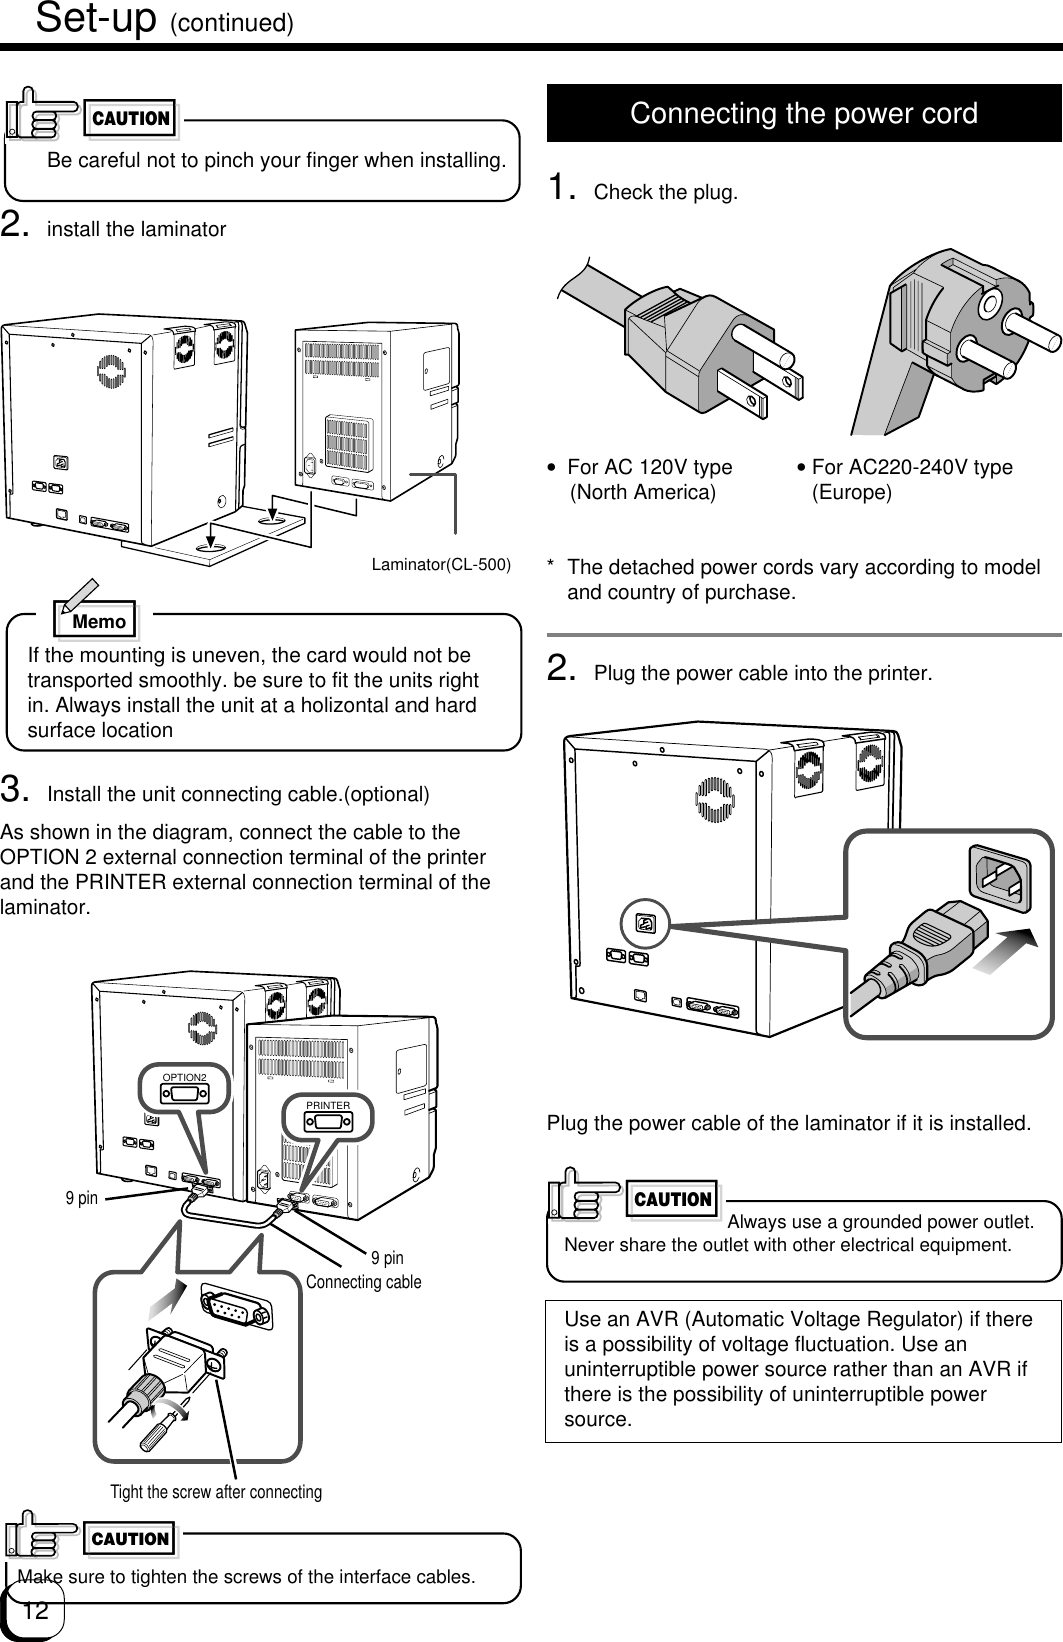 12Connecting the power cord1. Check the plug.•For AC 120V type           • For AC220-240V type    (North America)      (Europe)* The detached power cords vary according to modeland country of purchase.2. Plug the power cable into the printer.Plug the power cable of the laminator if it is installed.Always use a grounded power outlet.Never share the outlet with other electrical equipment.Use an AVR (Automatic Voltage Regulator) if thereis a possibility of voltage fluctuation. Use anuninterruptible power source rather than an AVR ifthere is the possibility of uninterruptible powersource.CAUTIONSet-up (continued)CAUTIONLaminator(CL-500)2. install the laminatorBe careful not to pinch your finger when installing.MemoIf the mounting is uneven, the card would not betransported smoothly. be sure to fit the units rightin. Always install the unit at a holizontal and hardsurface location9 pin9 pinConnecting cableTight the screw after connectingOPTION2PRINTERCAUTIONMake sure to tighten the screws of the interface cables.3. Install the unit connecting cable.(optional)As shown in the diagram, connect the cable to theOPTION 2 external connection terminal of the printerand the PRINTER external connection terminal of thelaminator.